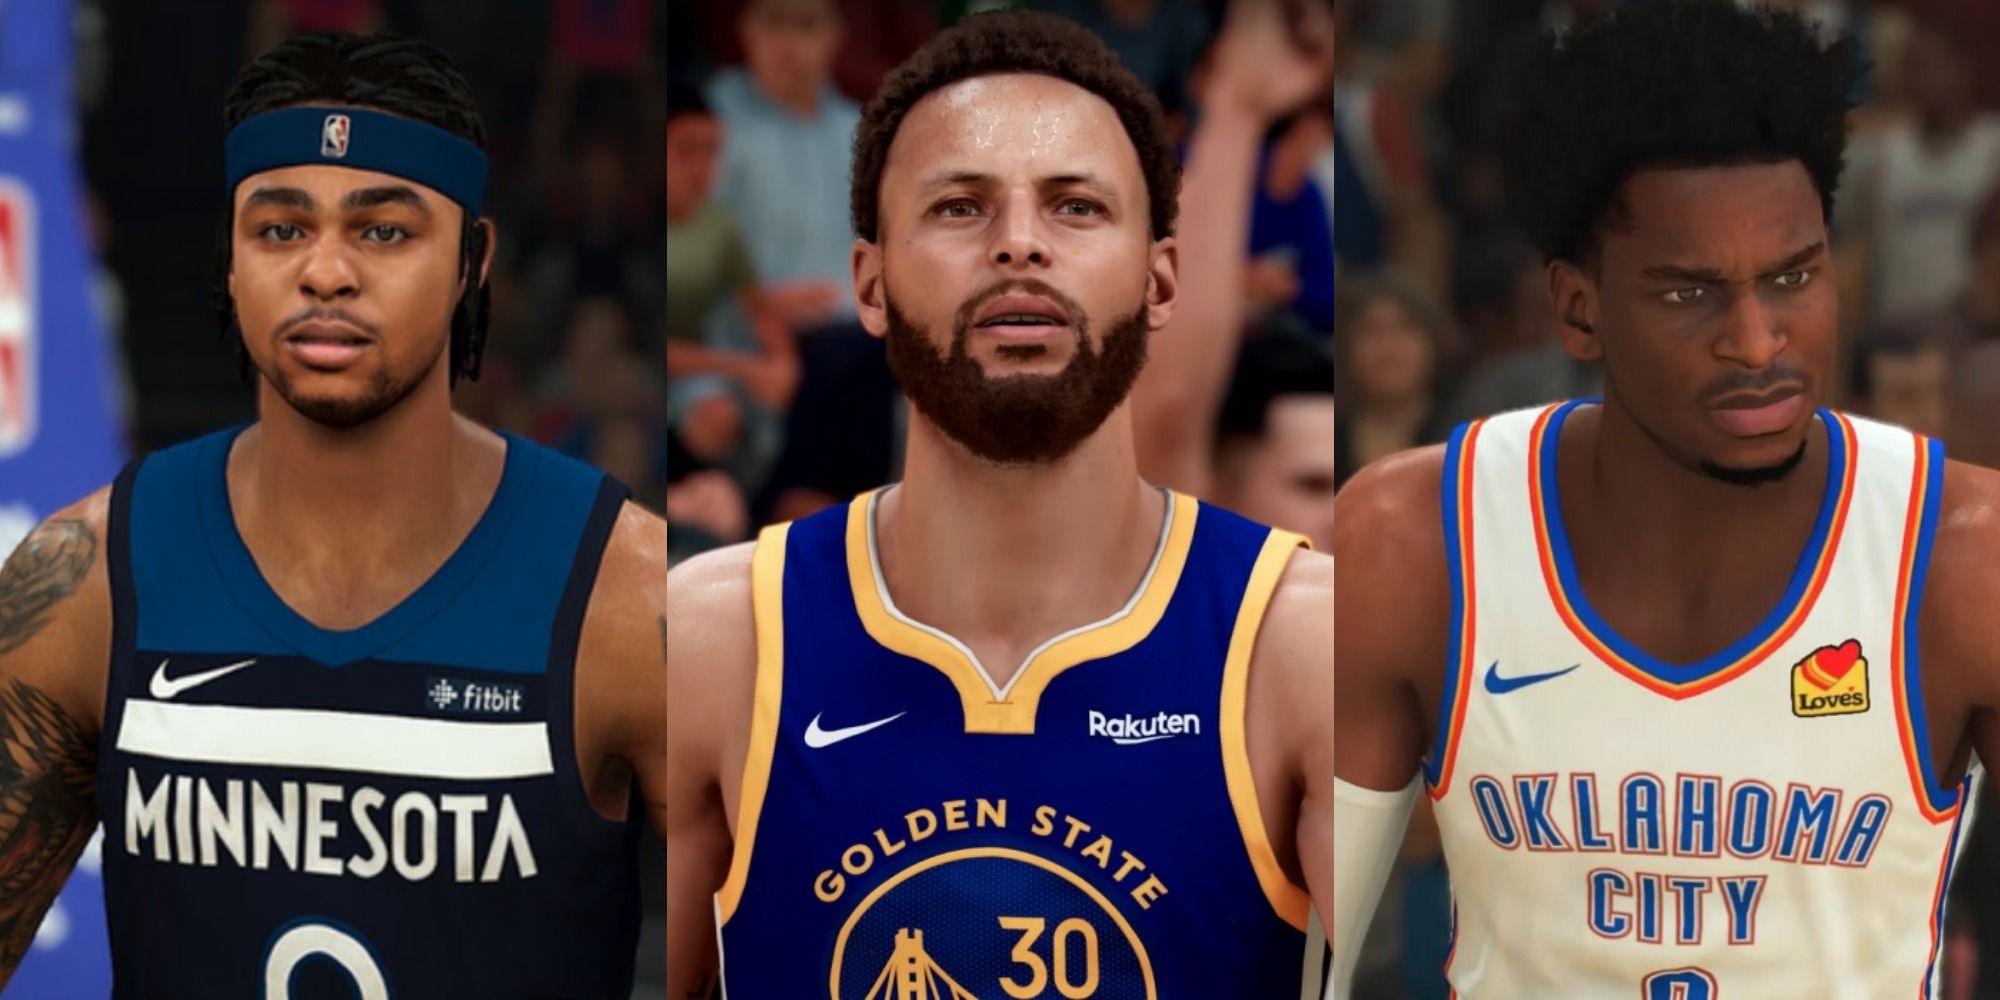 The new classic teams for NBA 2K20